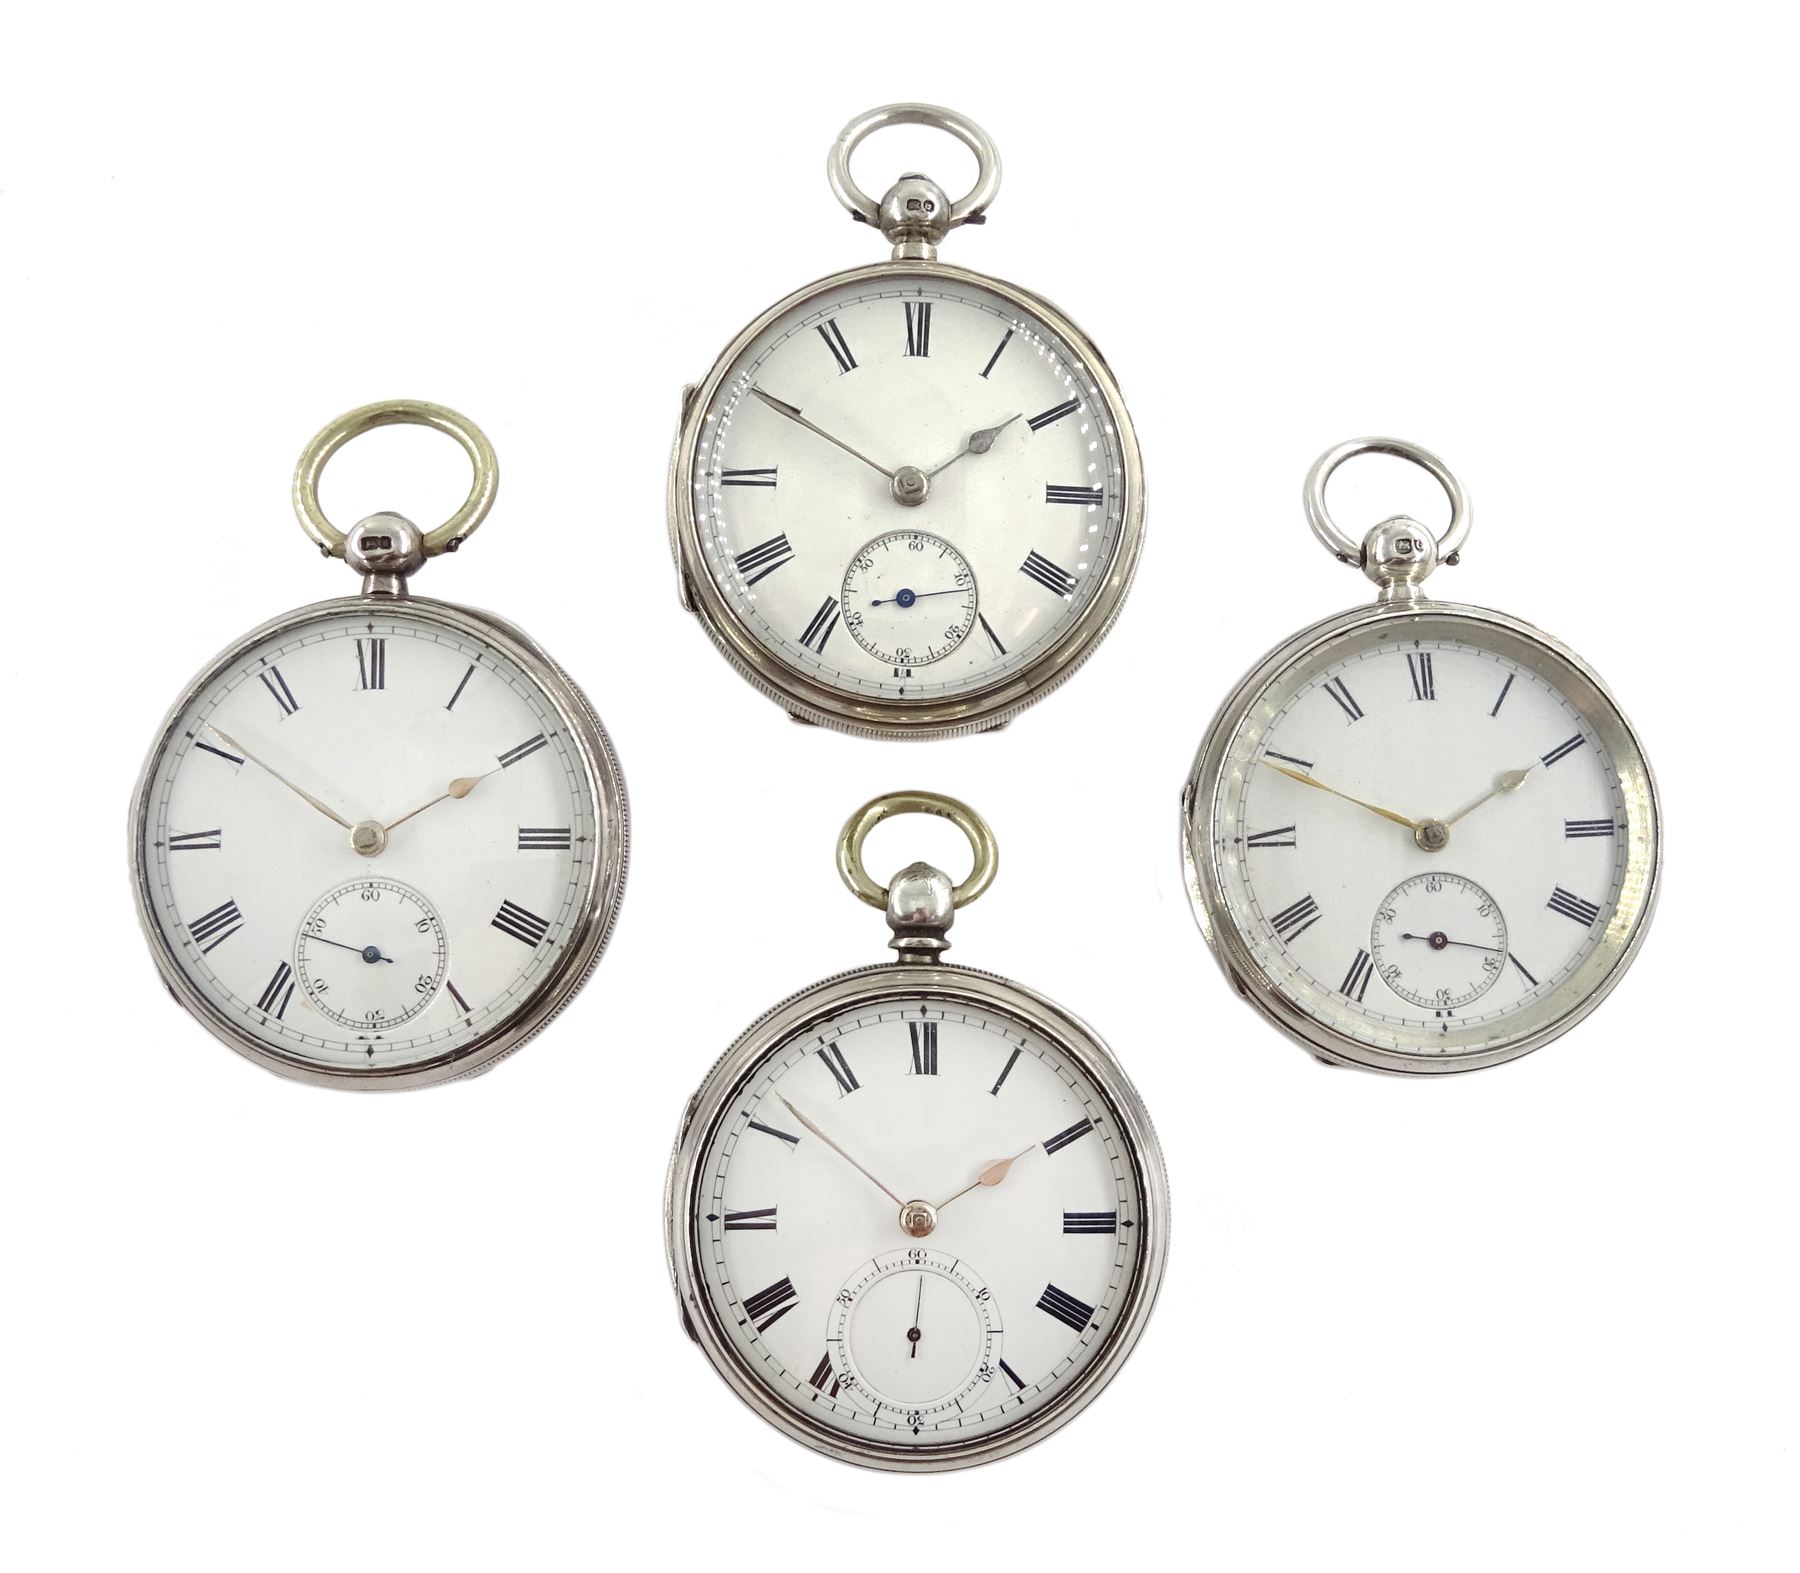 Four 19th/early 20th century silver open face English lever fusee pocket watches, white enamel dials